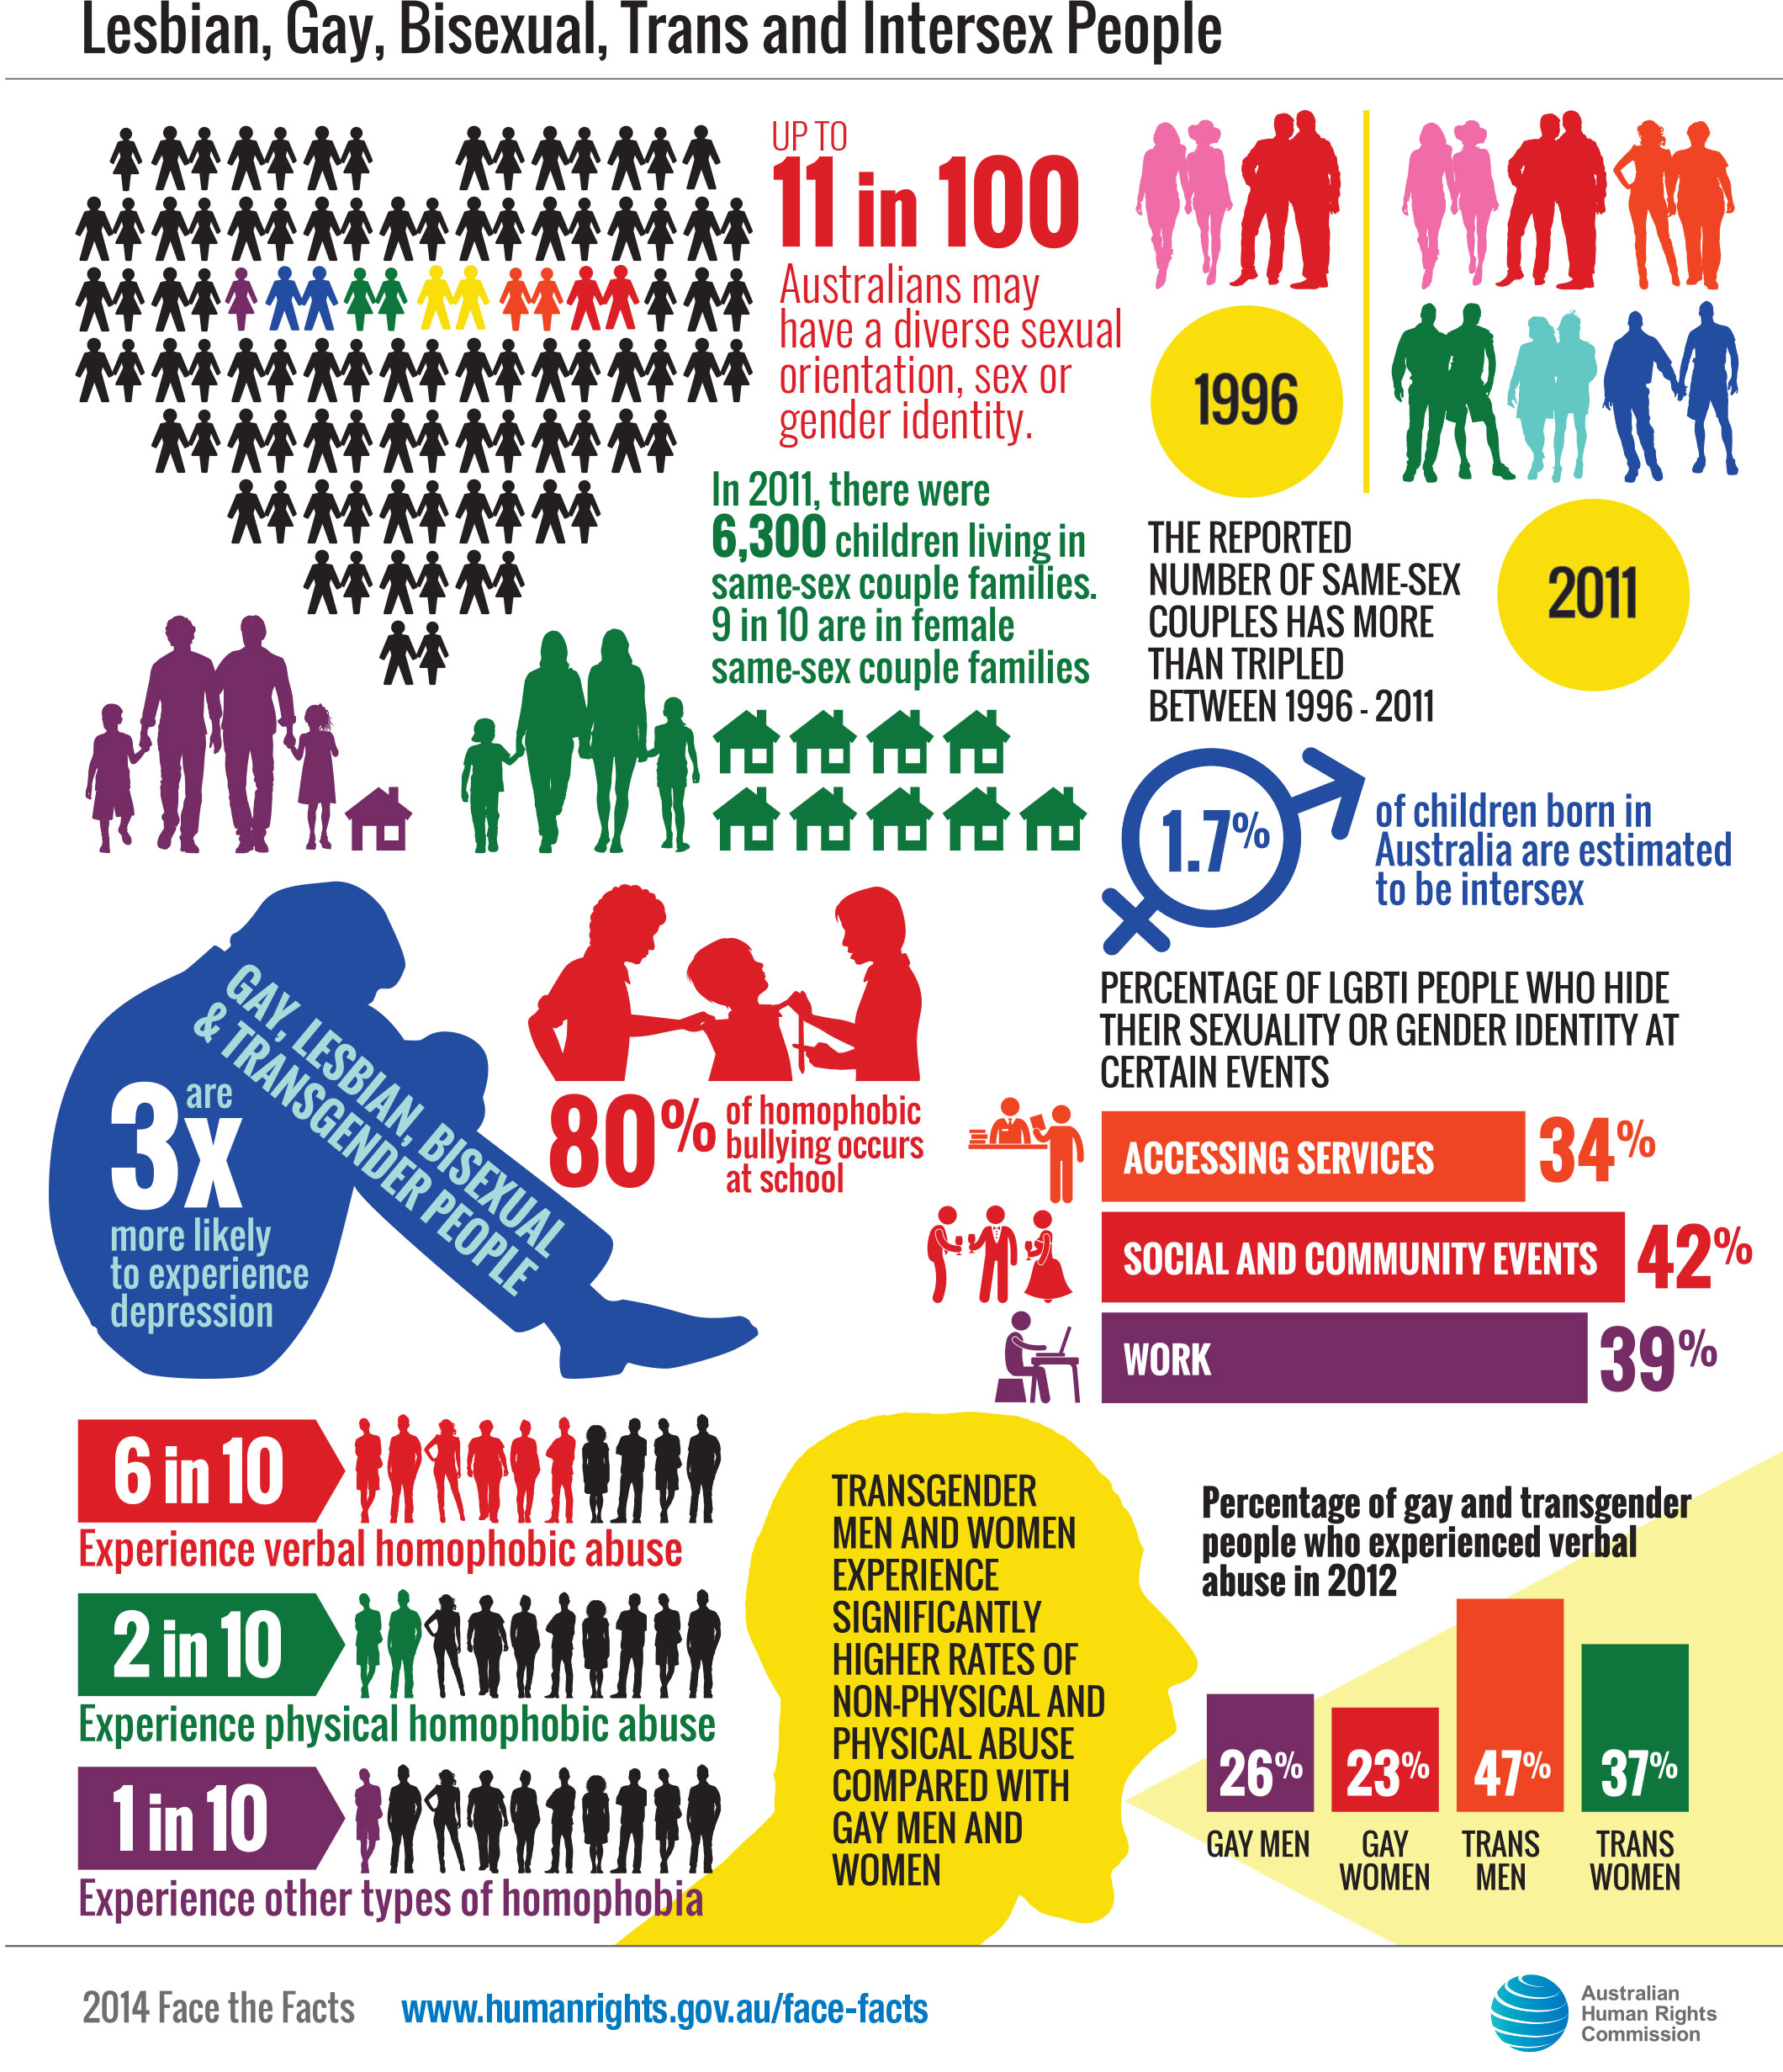 Face the facts lesbian, gay, bisexual, trans and intersex people statistics